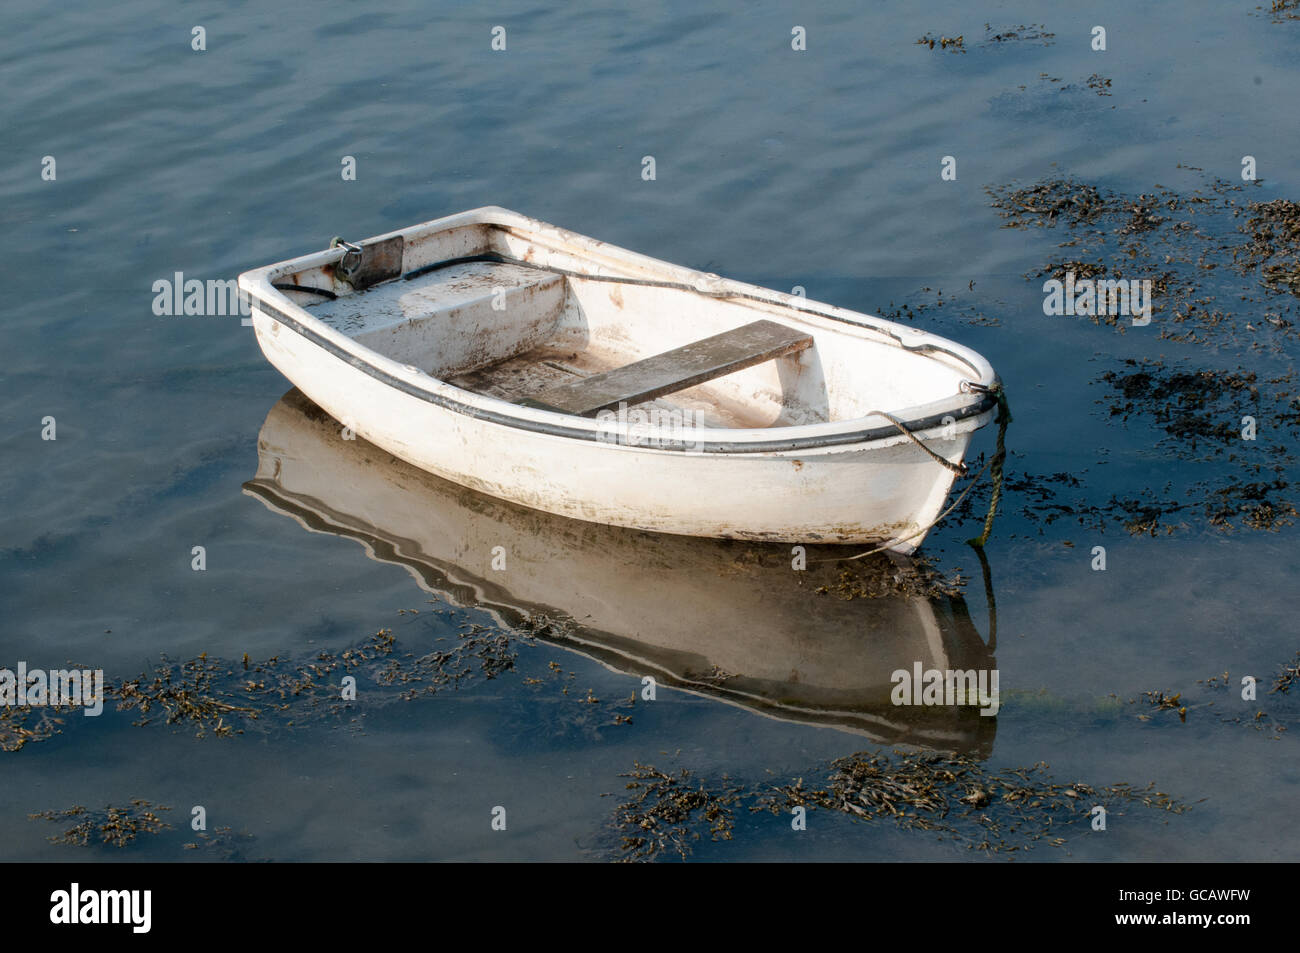 Small fishing boat at sunrise, moored in the water ready for sailing Stock Photo